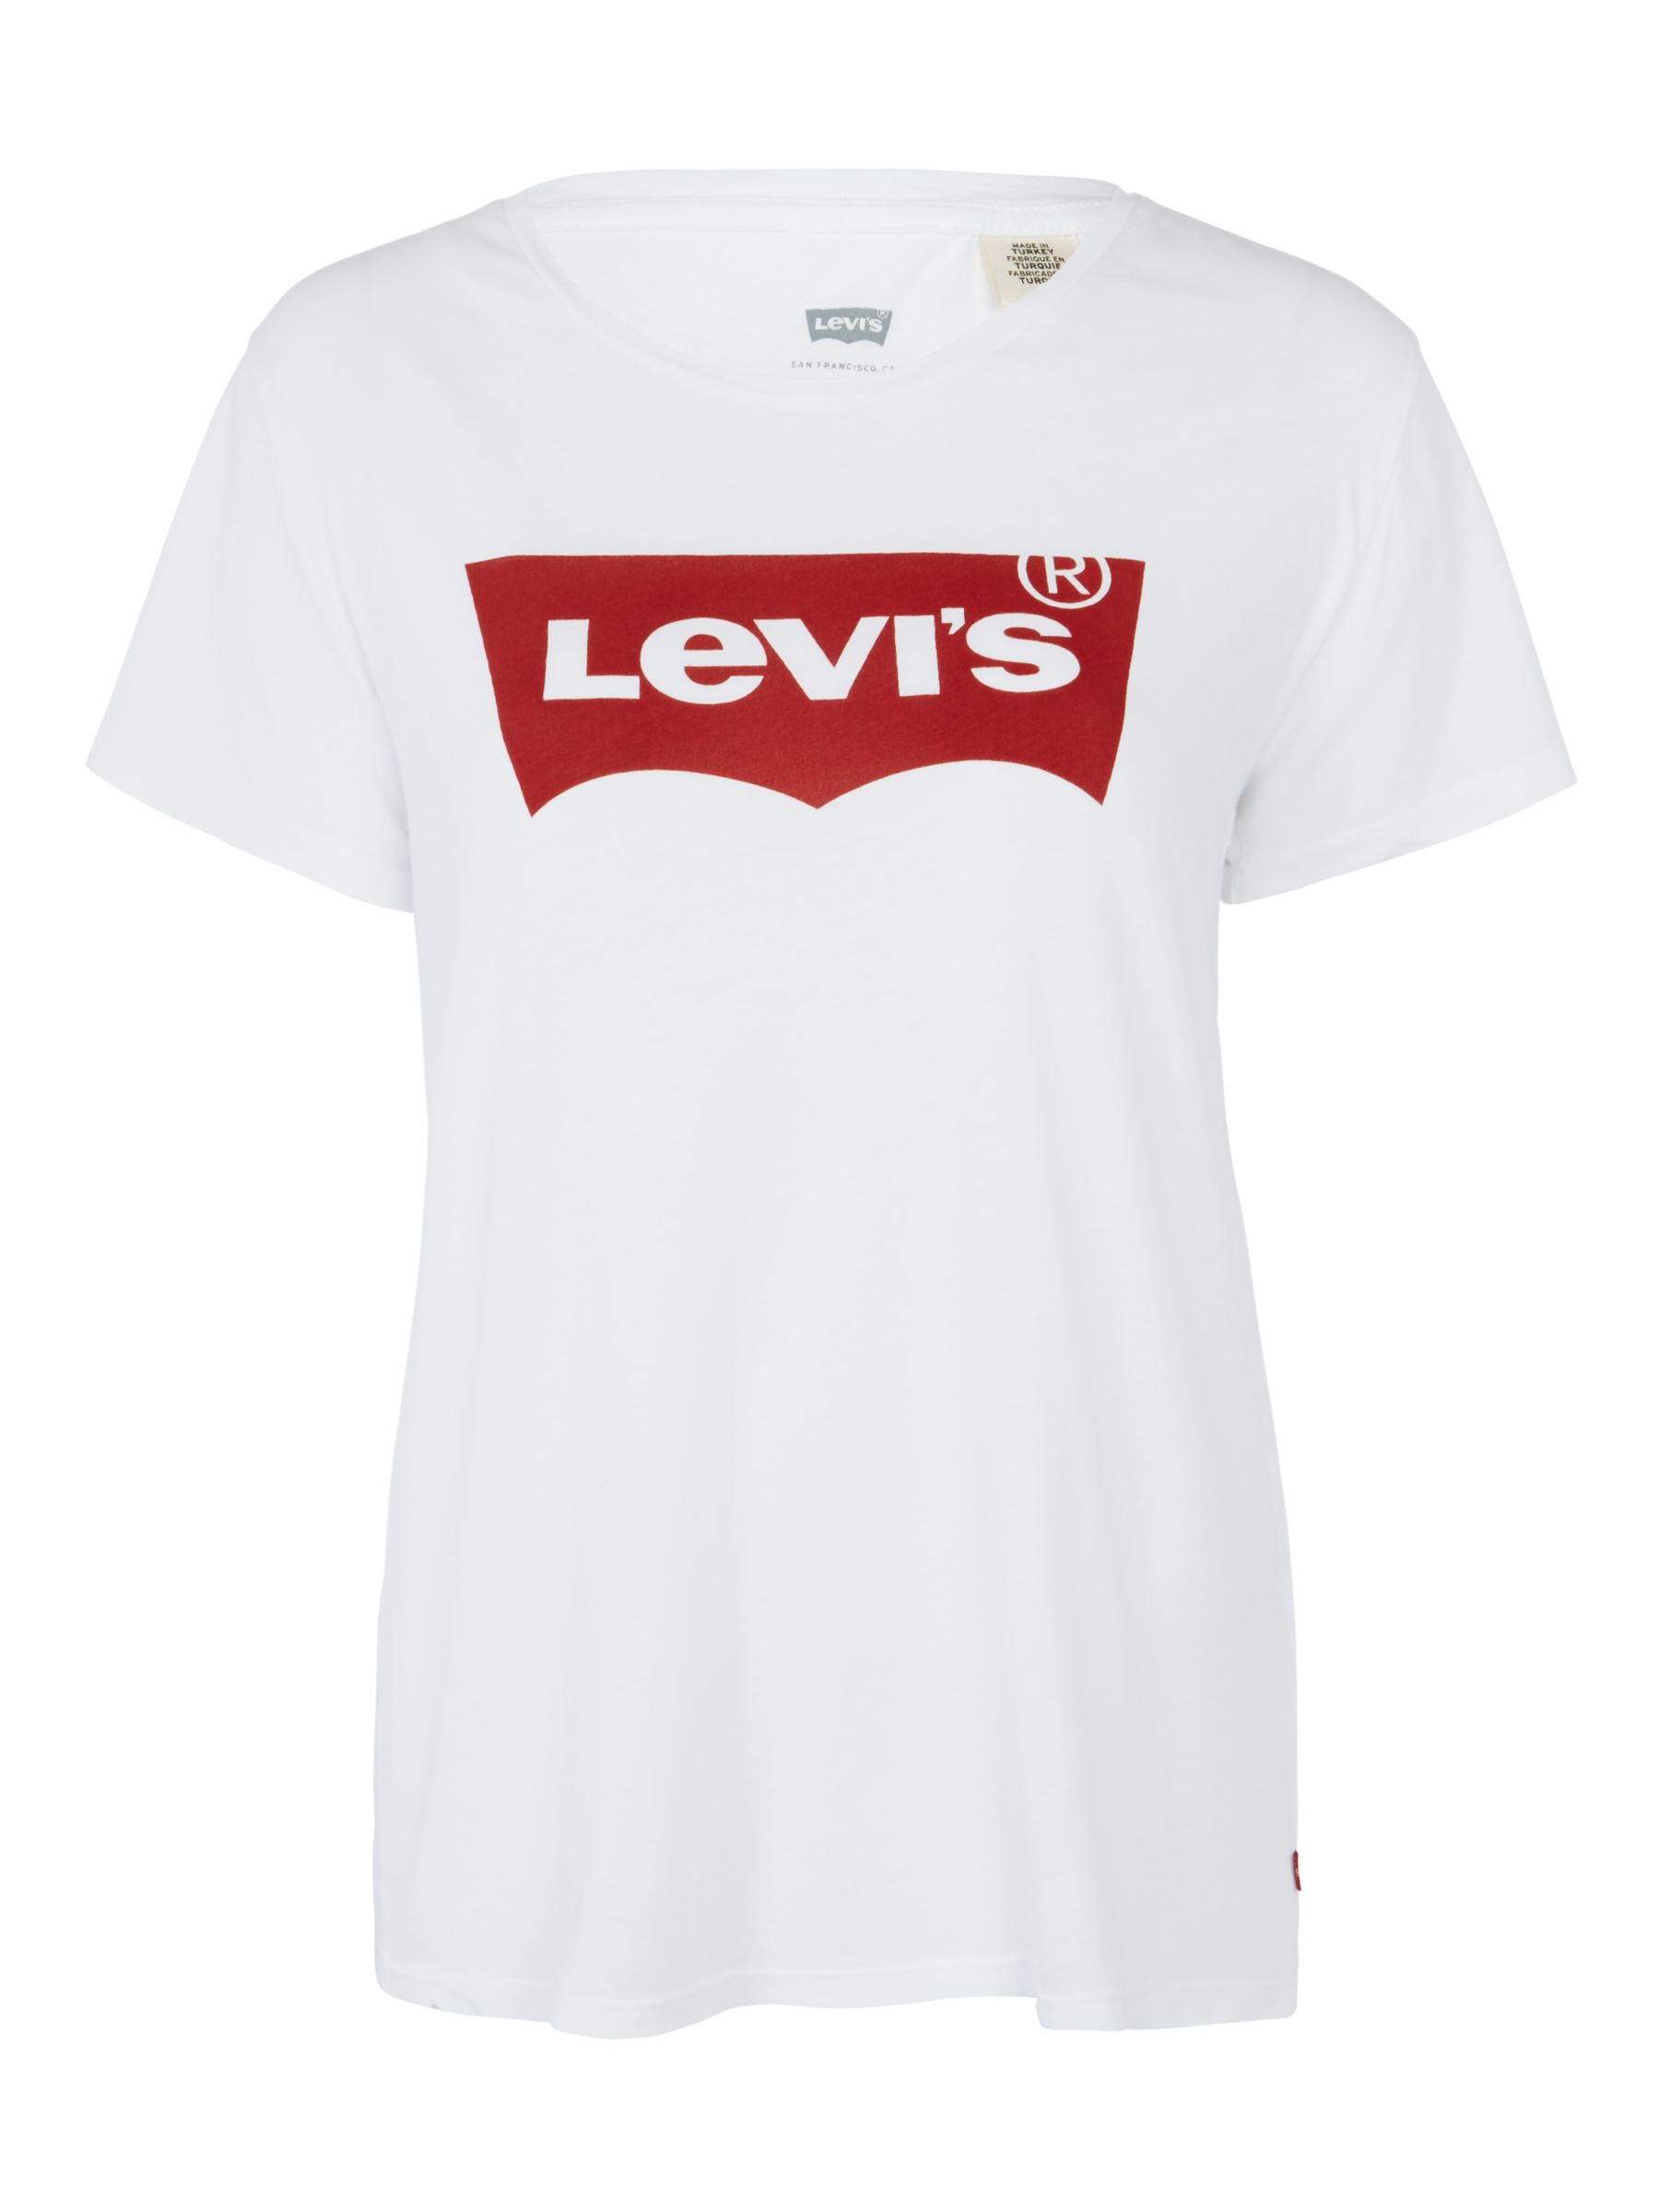 Top 33+ imagen levi’s red and white t shirt